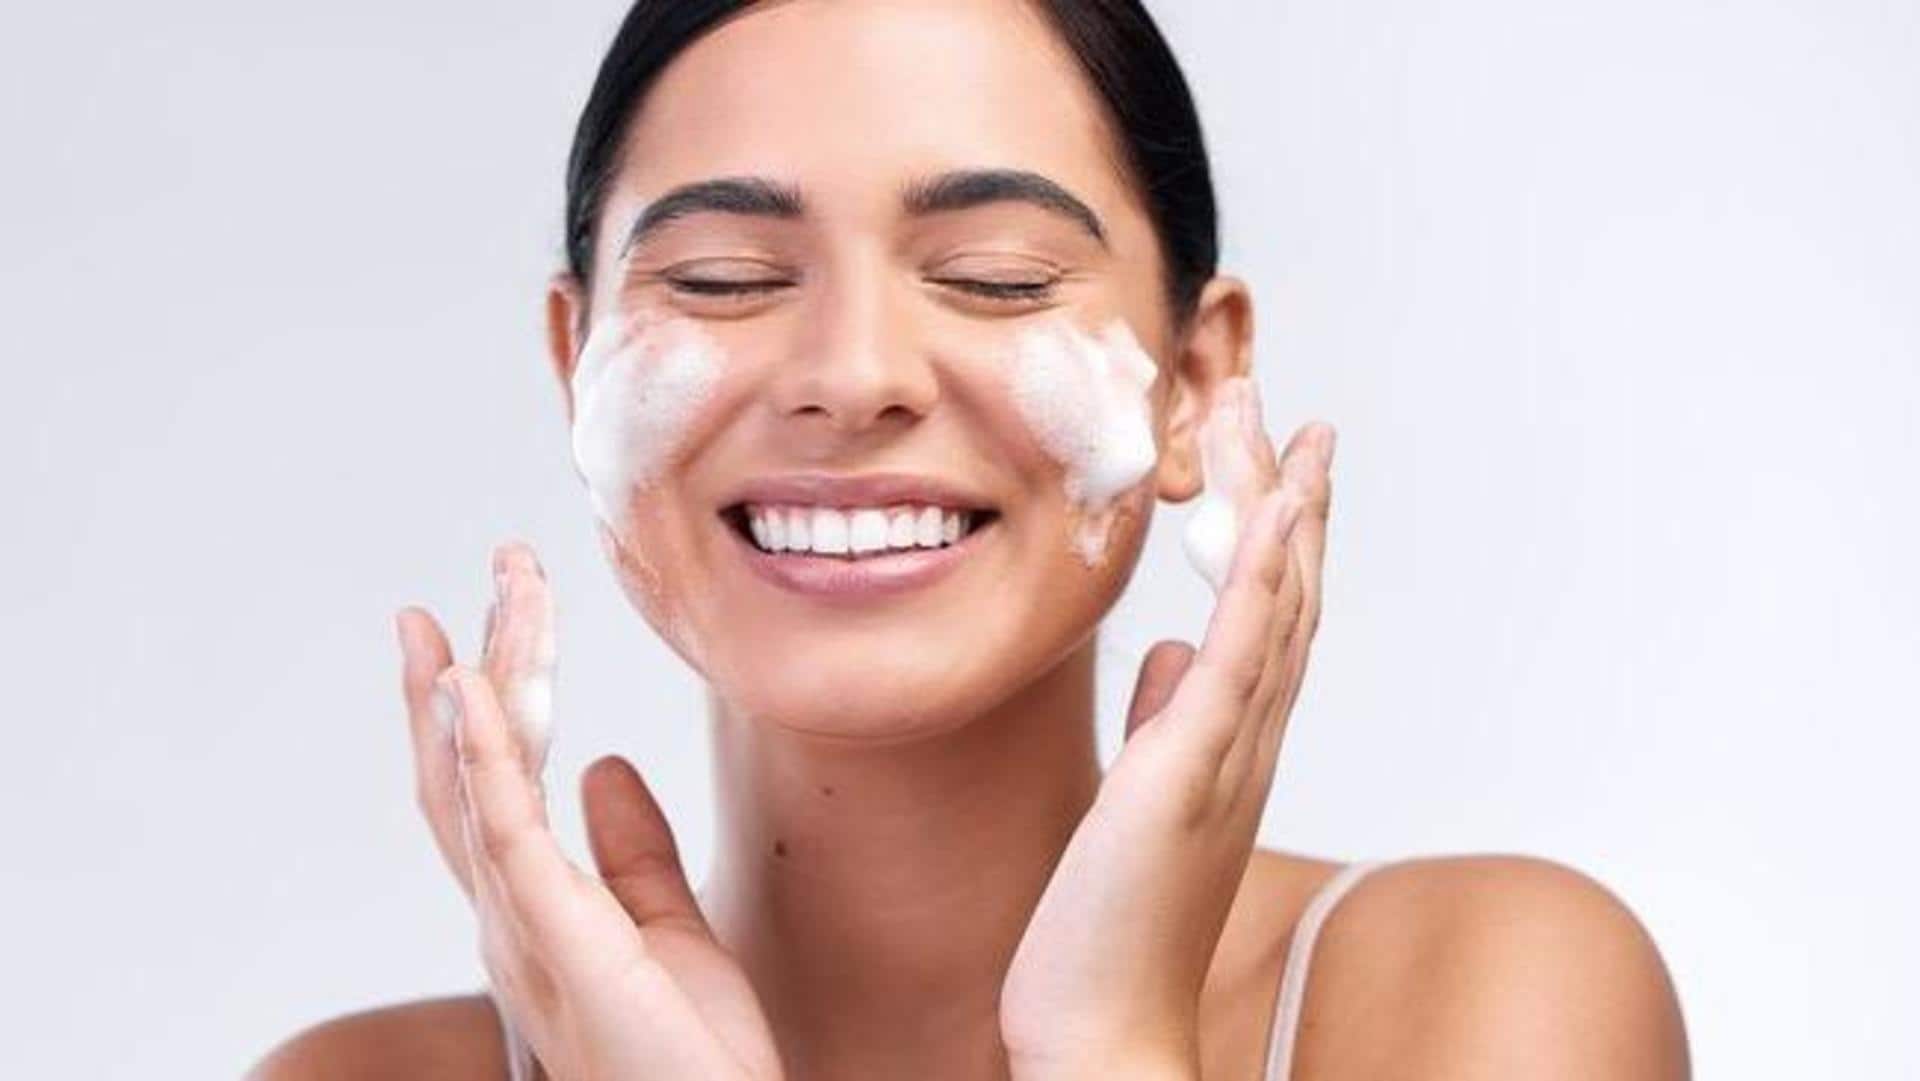 Follow these few skincare tips for combination skin